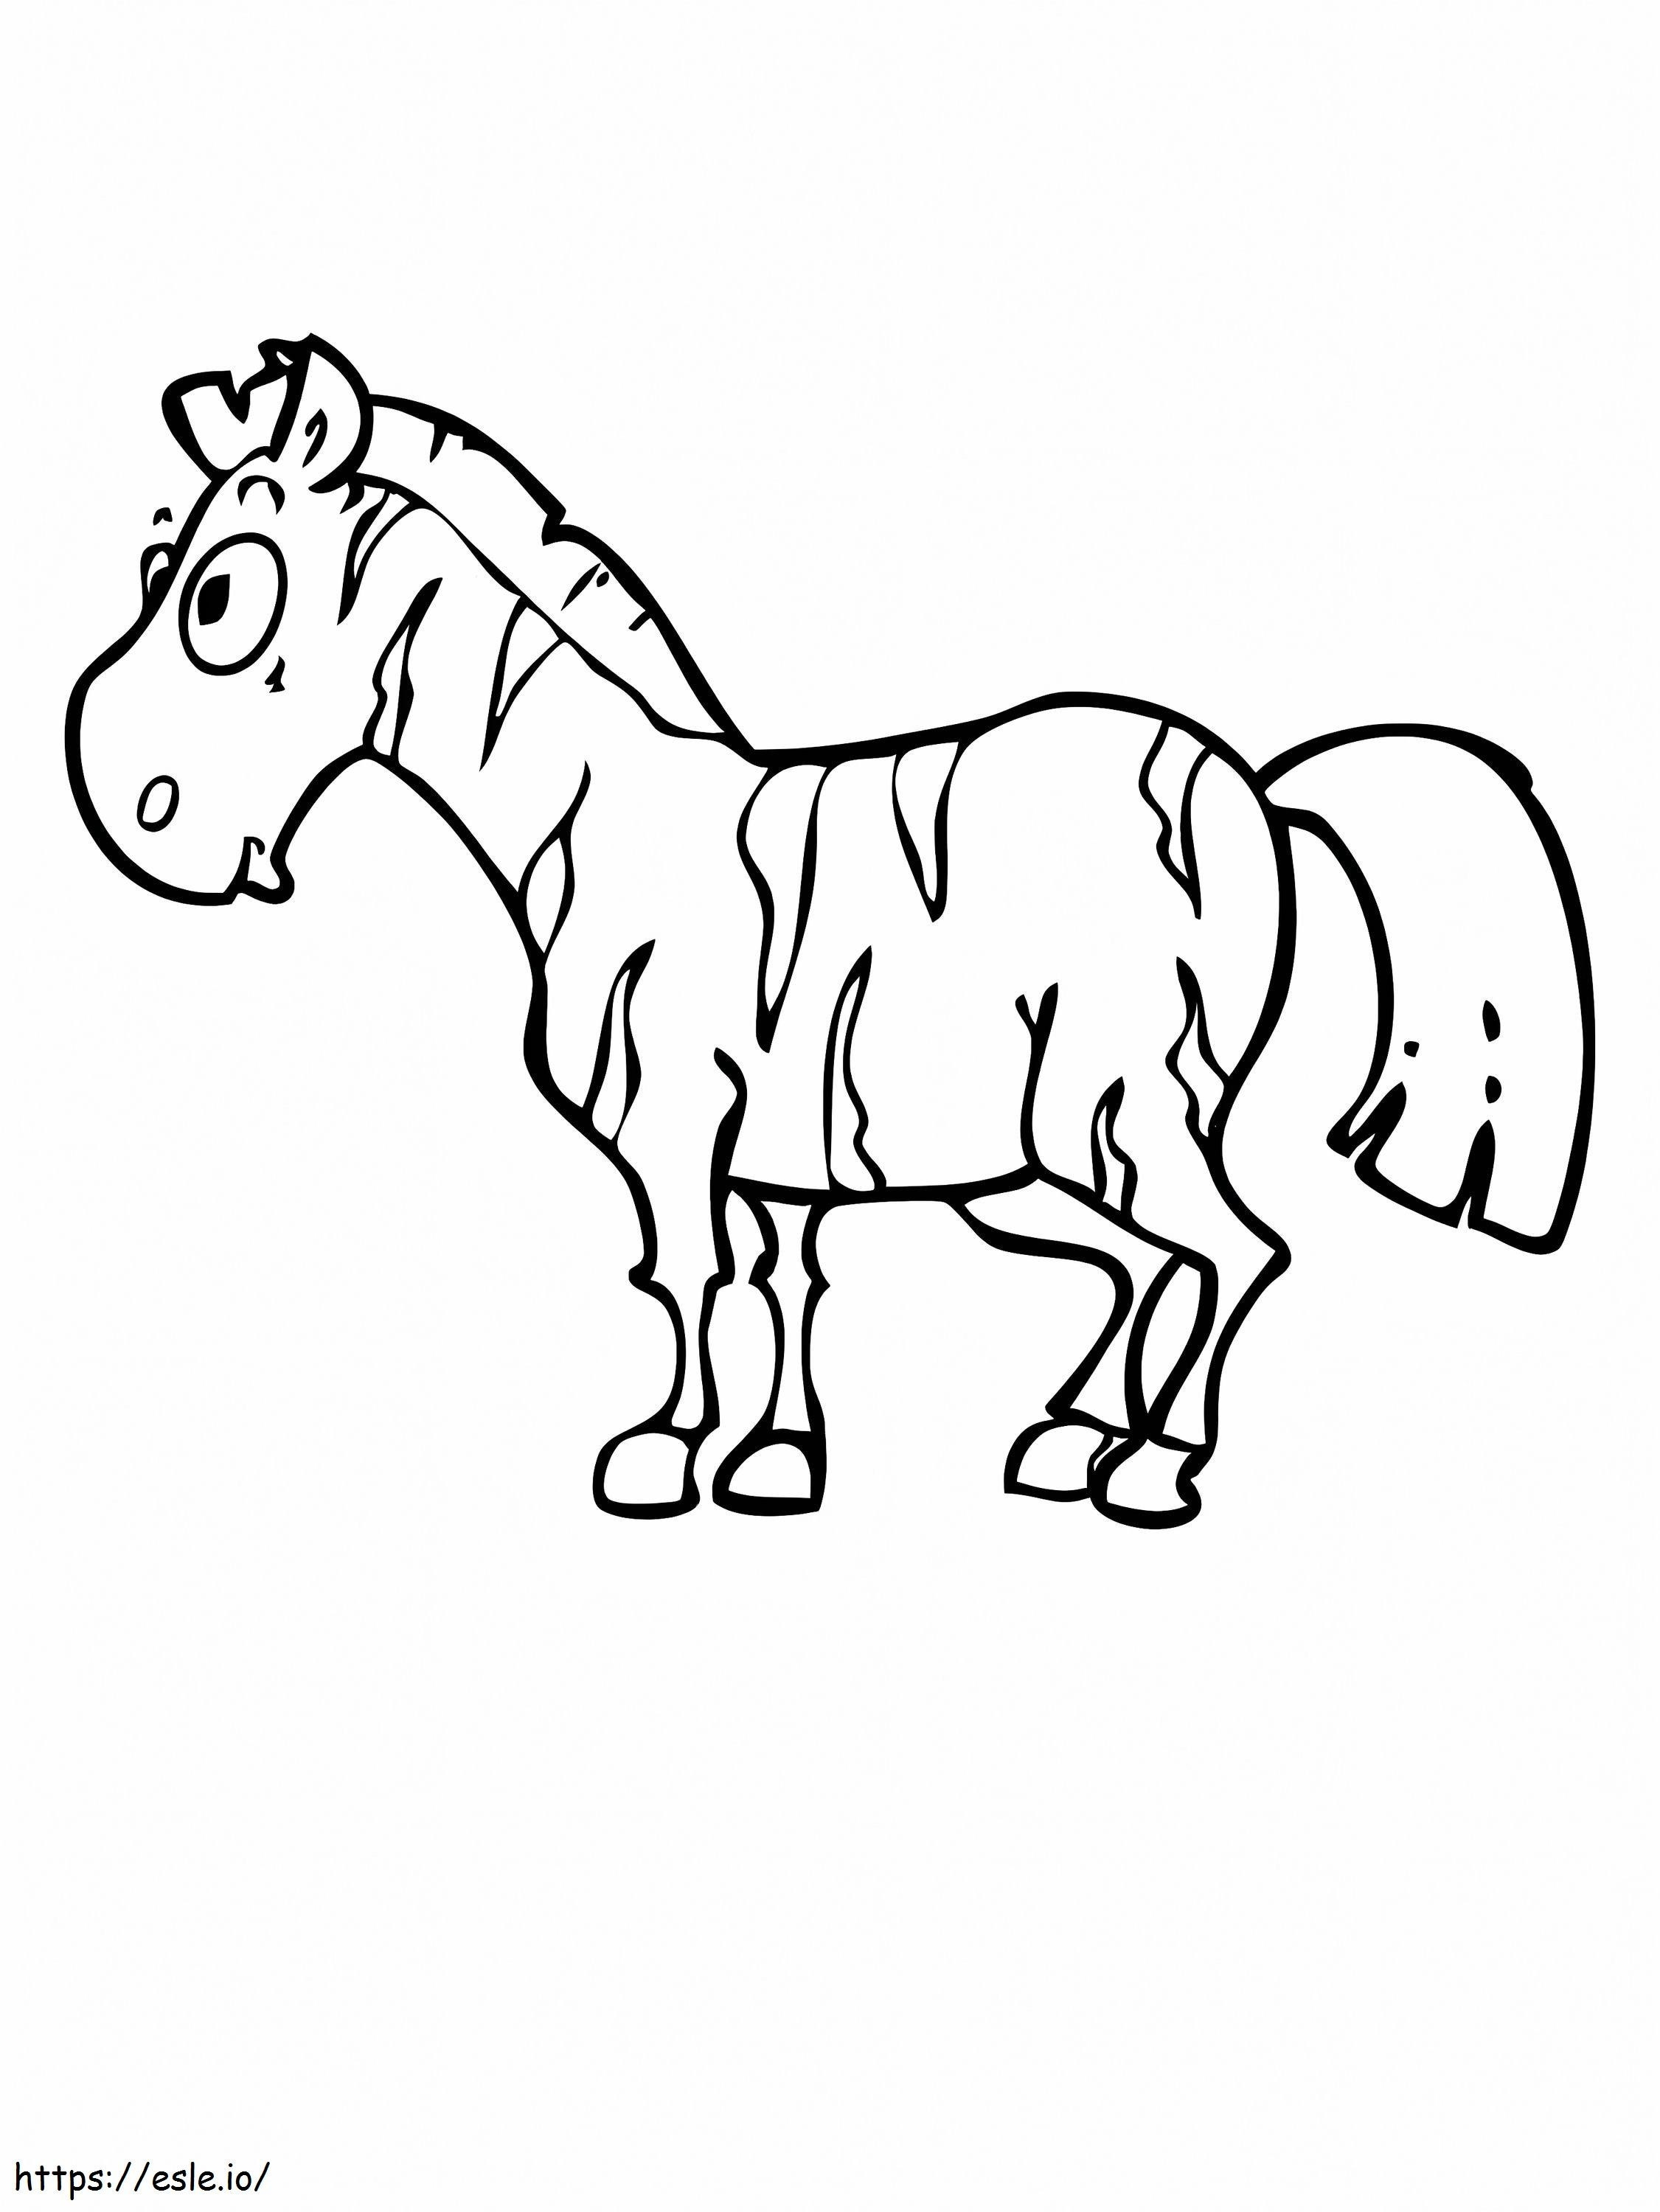 Zebra Free Images coloring page